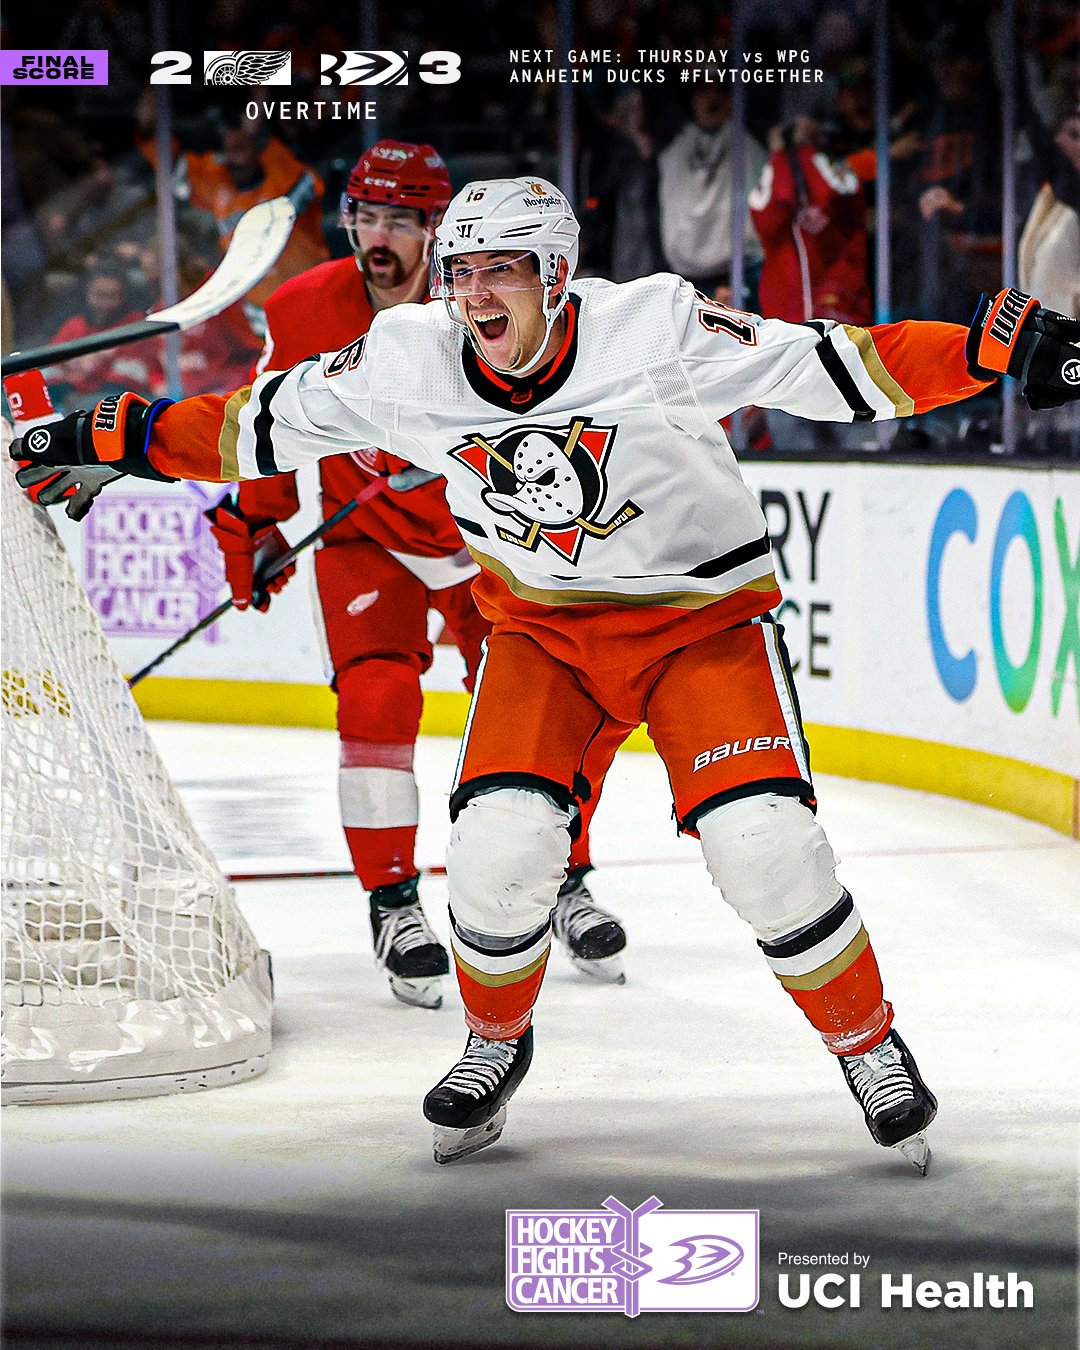 The quack is back for the Anaheim Ducks, sparking a surge of